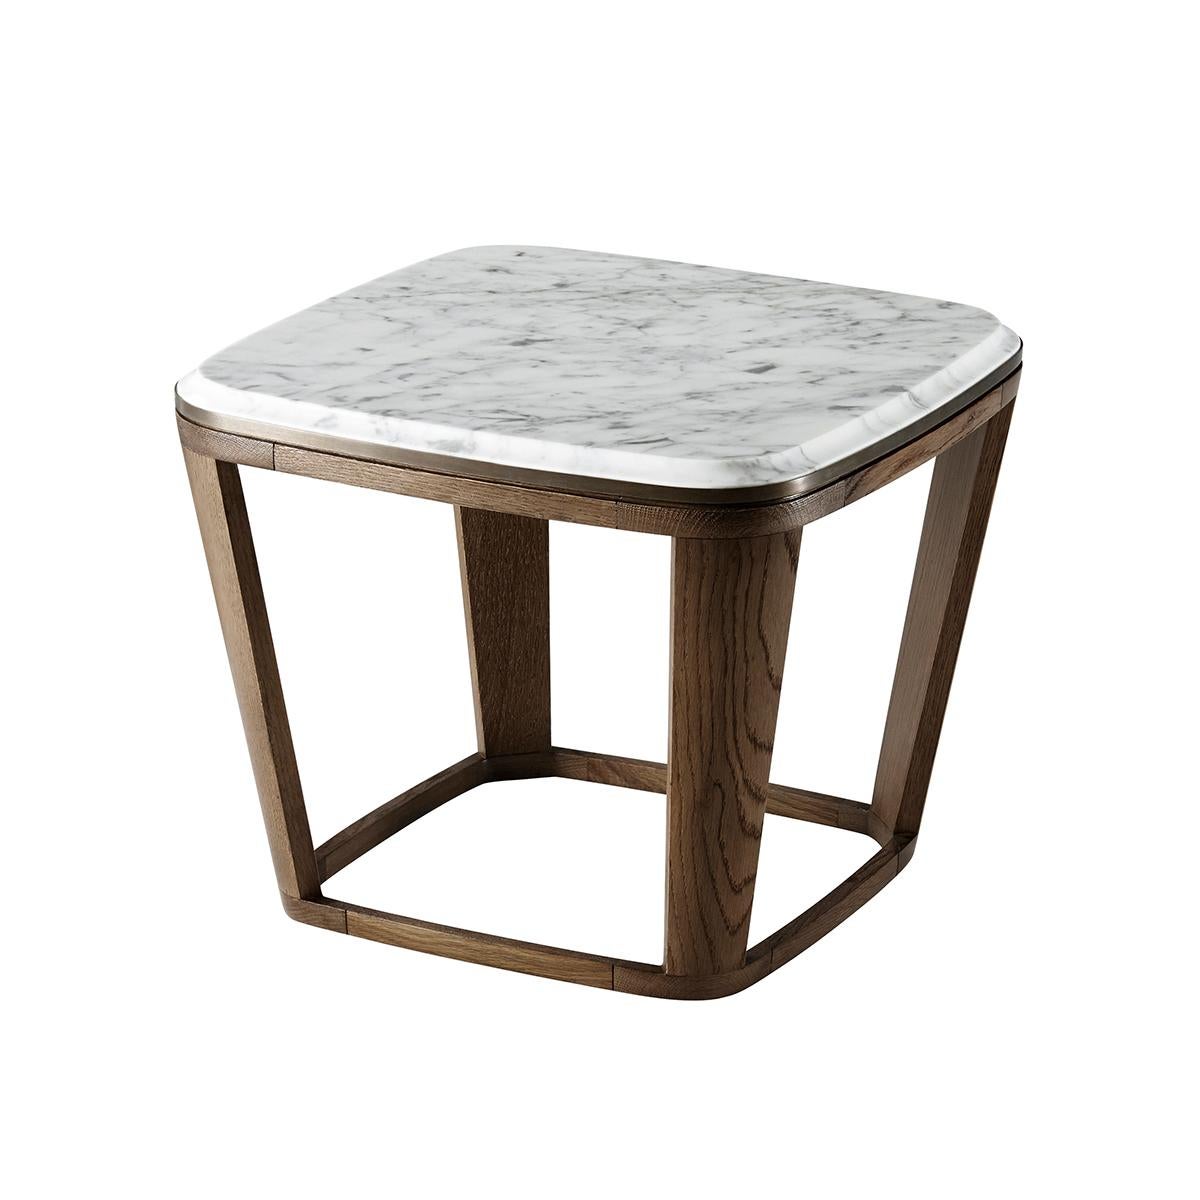 A unique tapered cube marble top square end table. With a beveled edge marble with rounded corners, with bronze-finished stainless steel molding and a tapered oak frame base.

Dimensions: 19.75